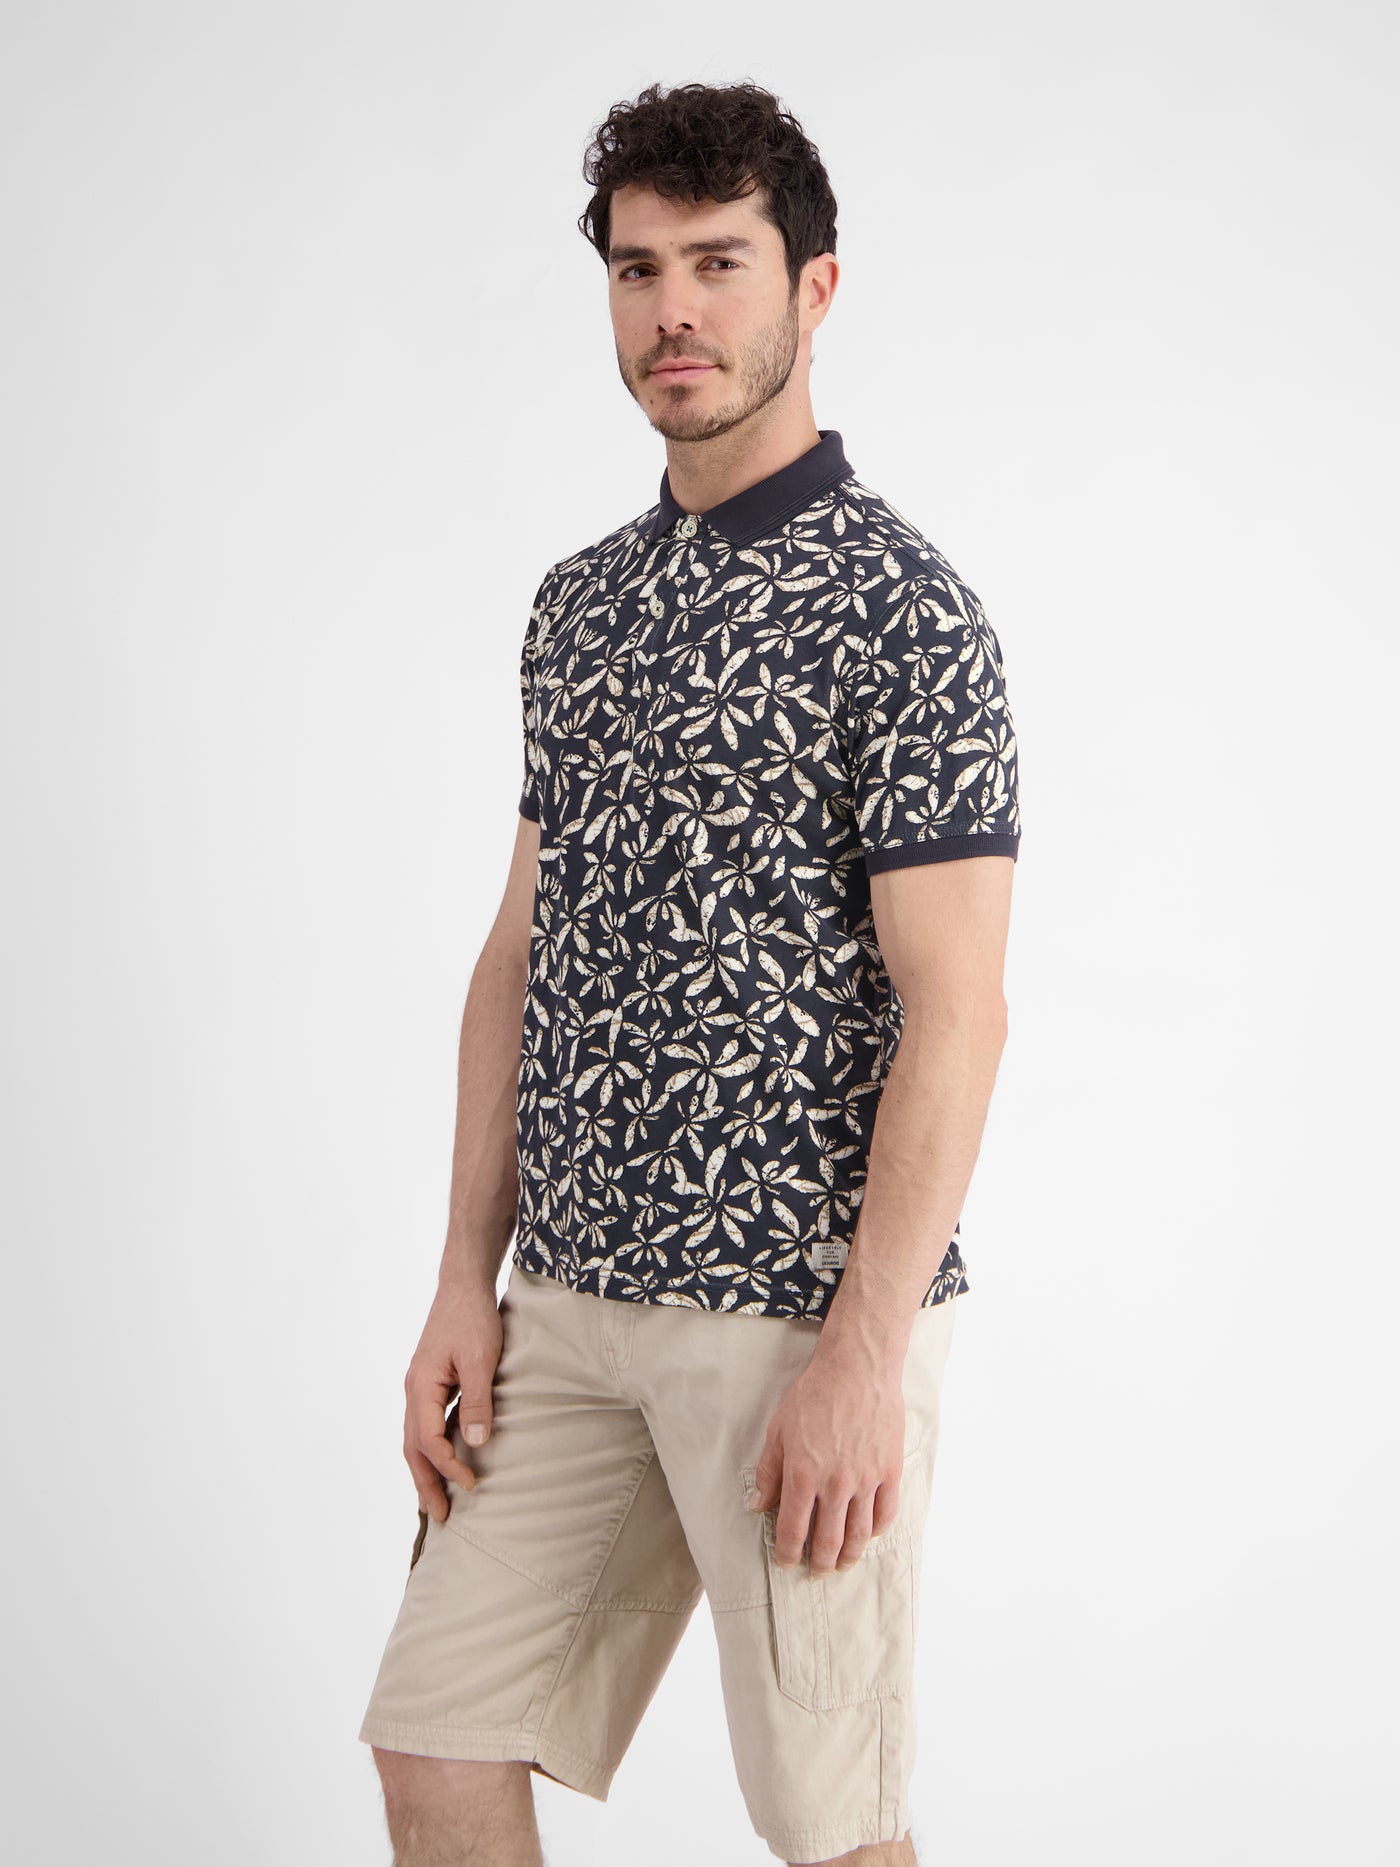 Men's polo shirt with floral all-over print